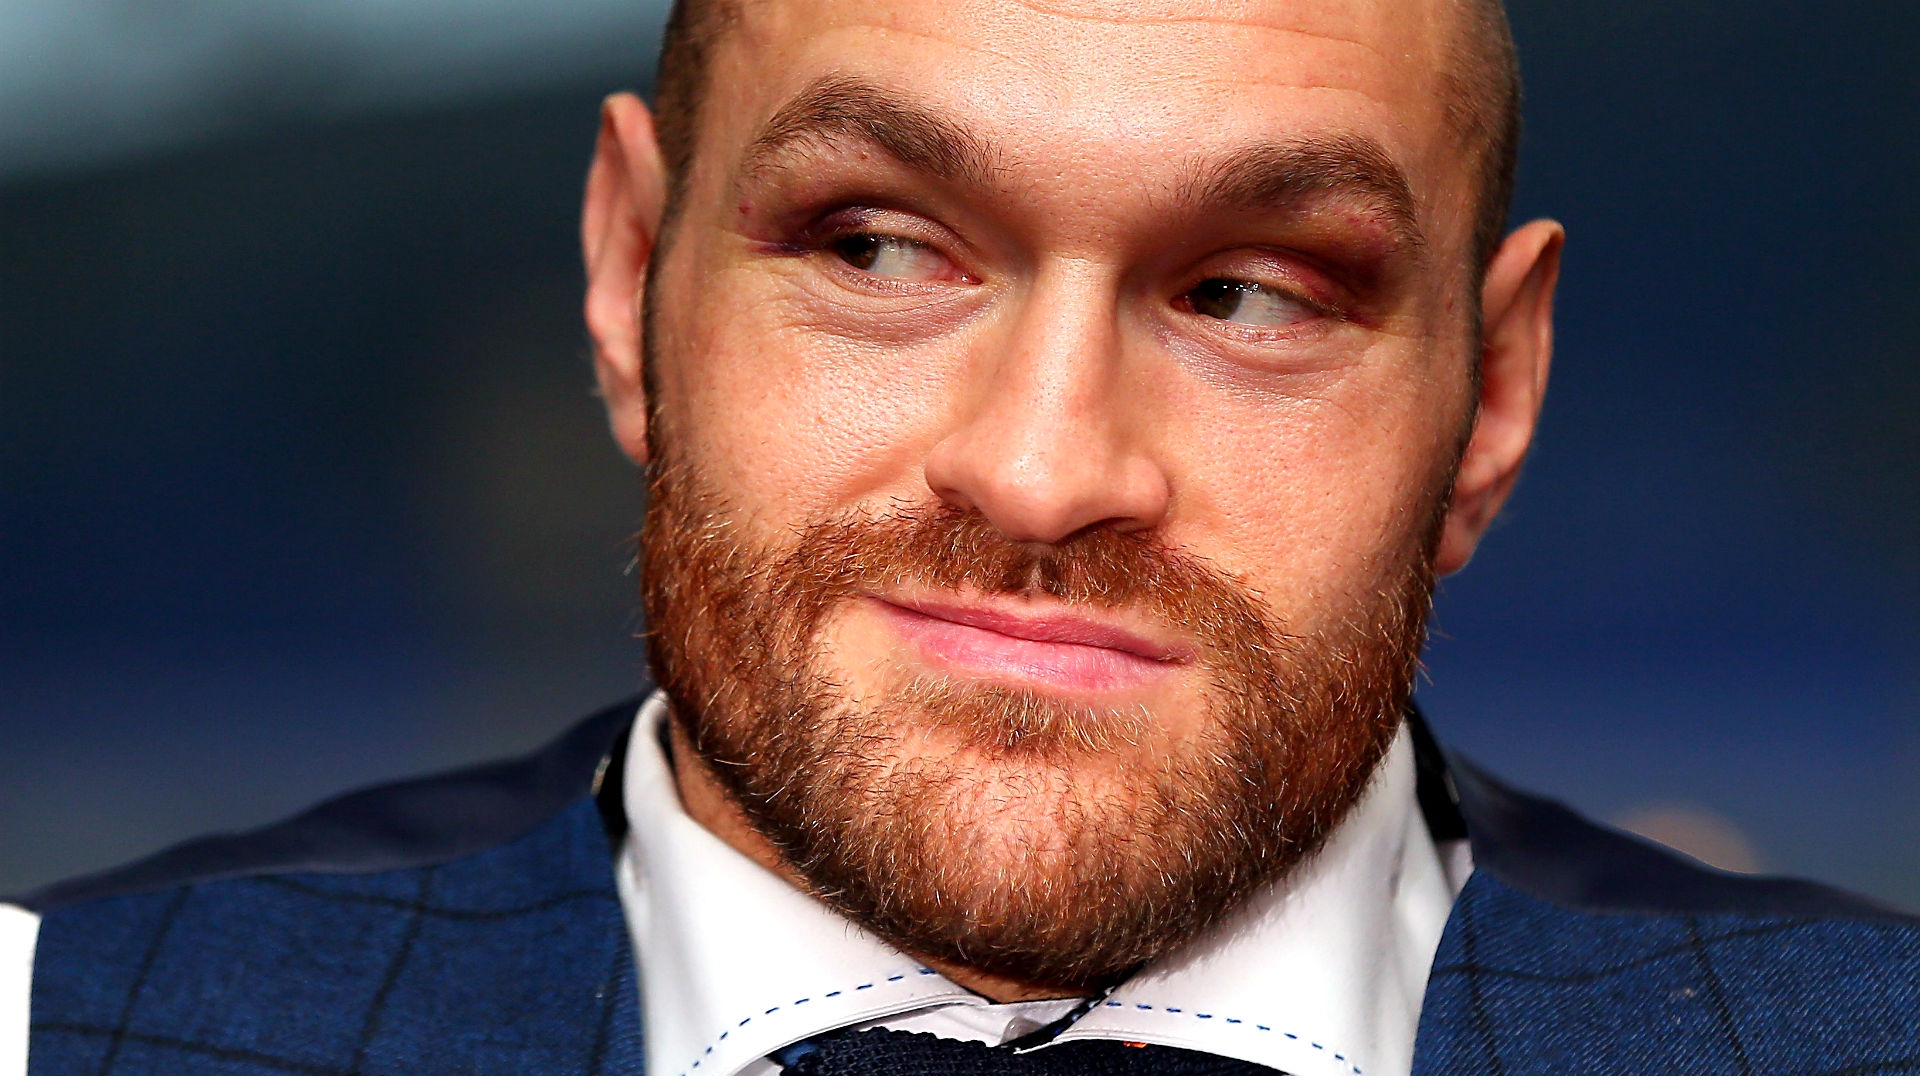 Tyson Fury, new boxing king, stirs up controversy with sexist comments